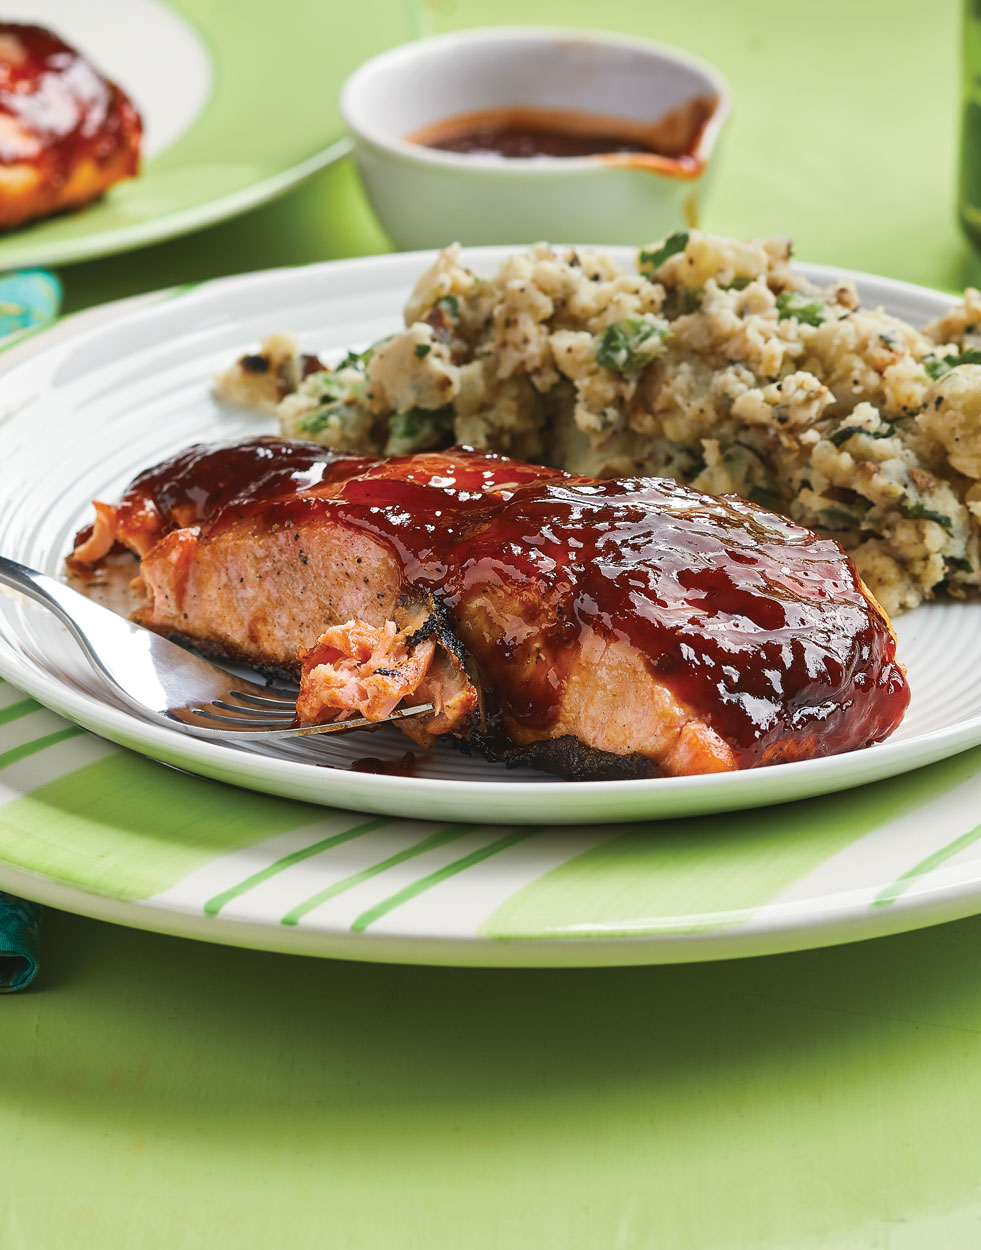 Cherry-Chipotle Grilled Salmon with grilled smashed potatoes